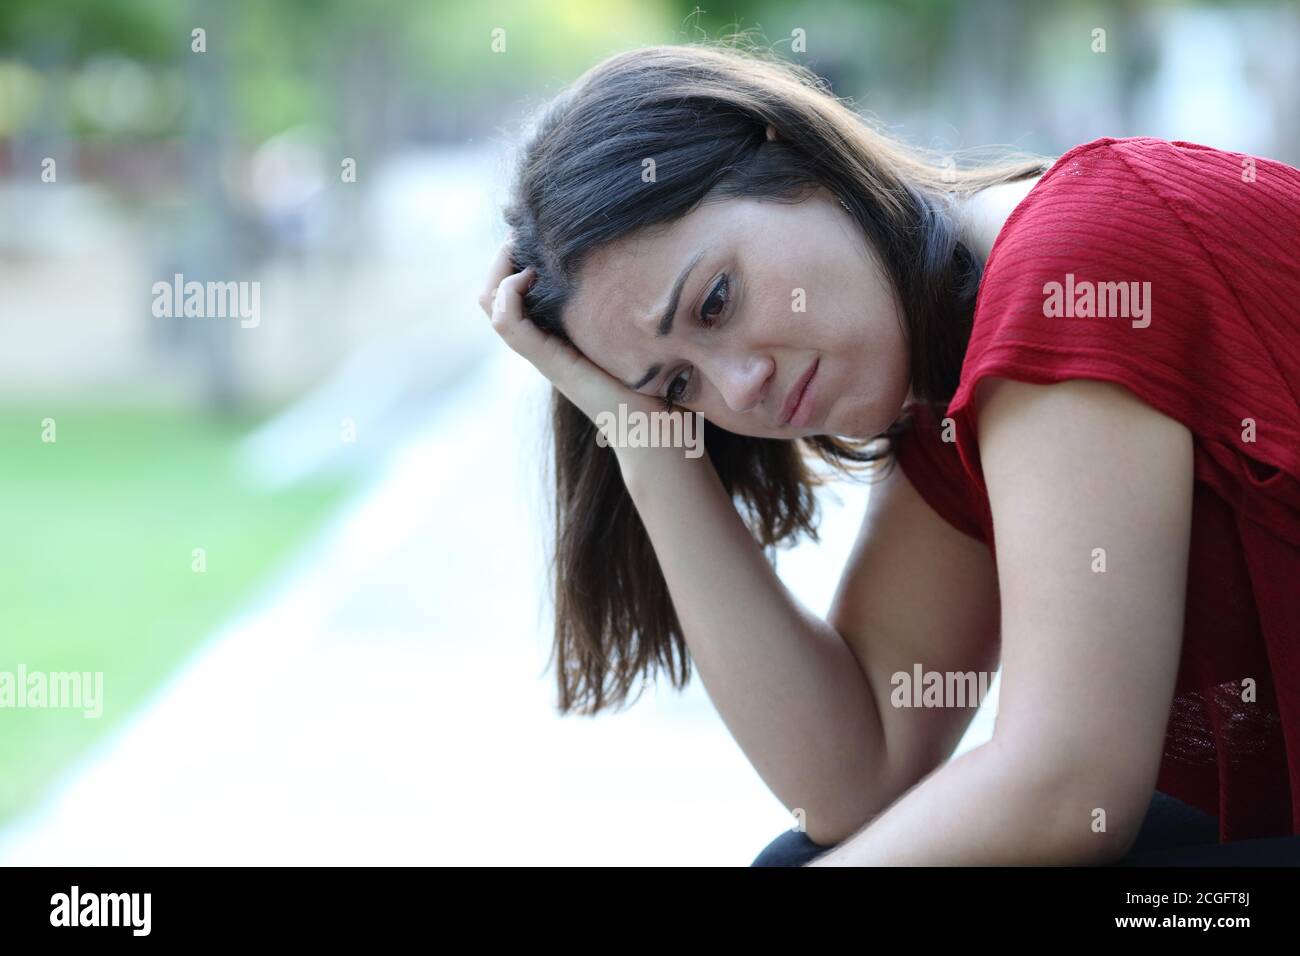 Sad woman sitting on a bench in a park complaining looking away Stock Photo